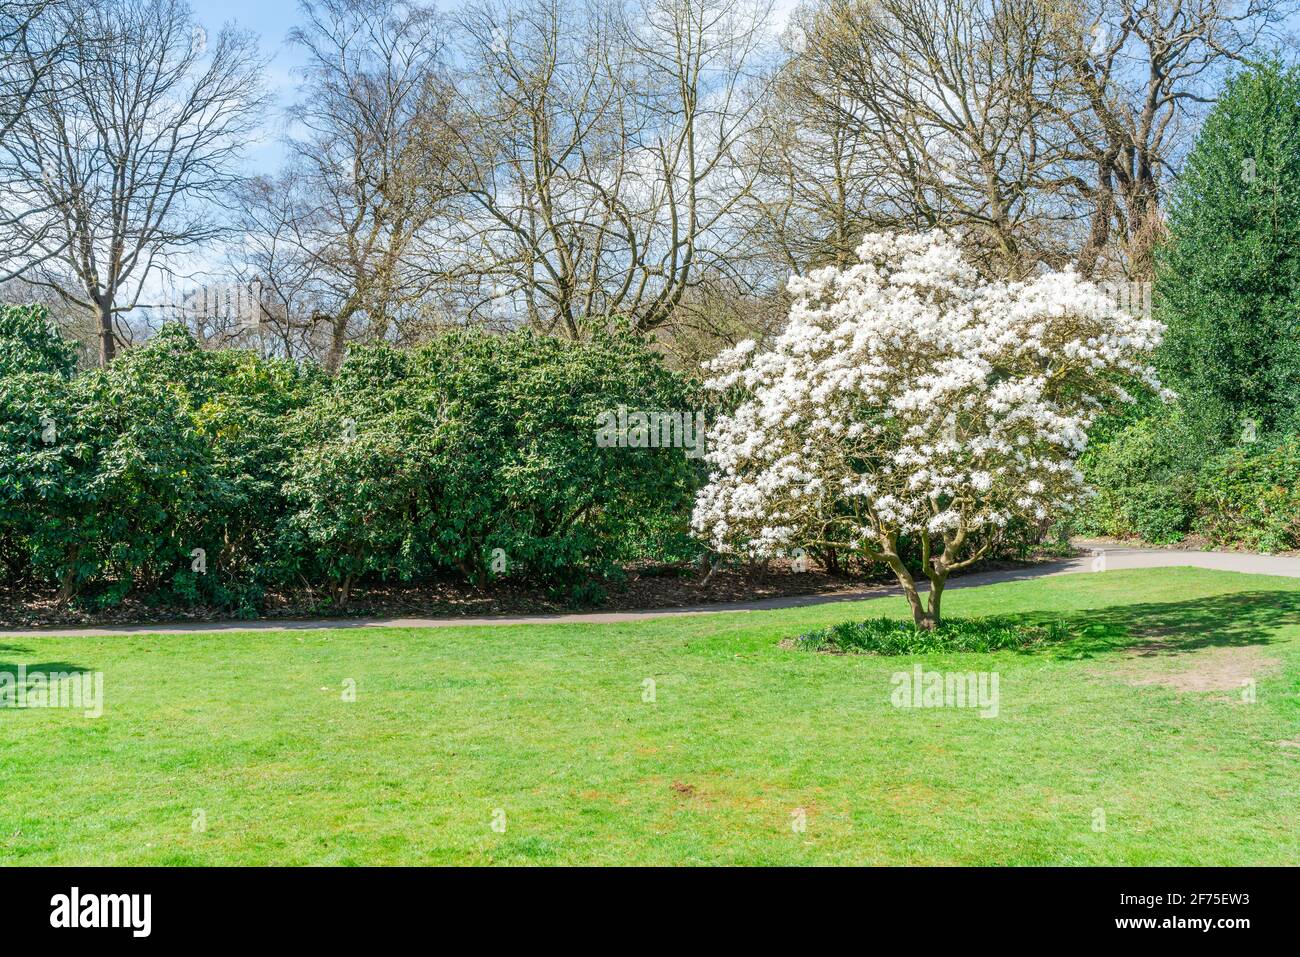 A white blooming tree in early spring in a park Stock Photo